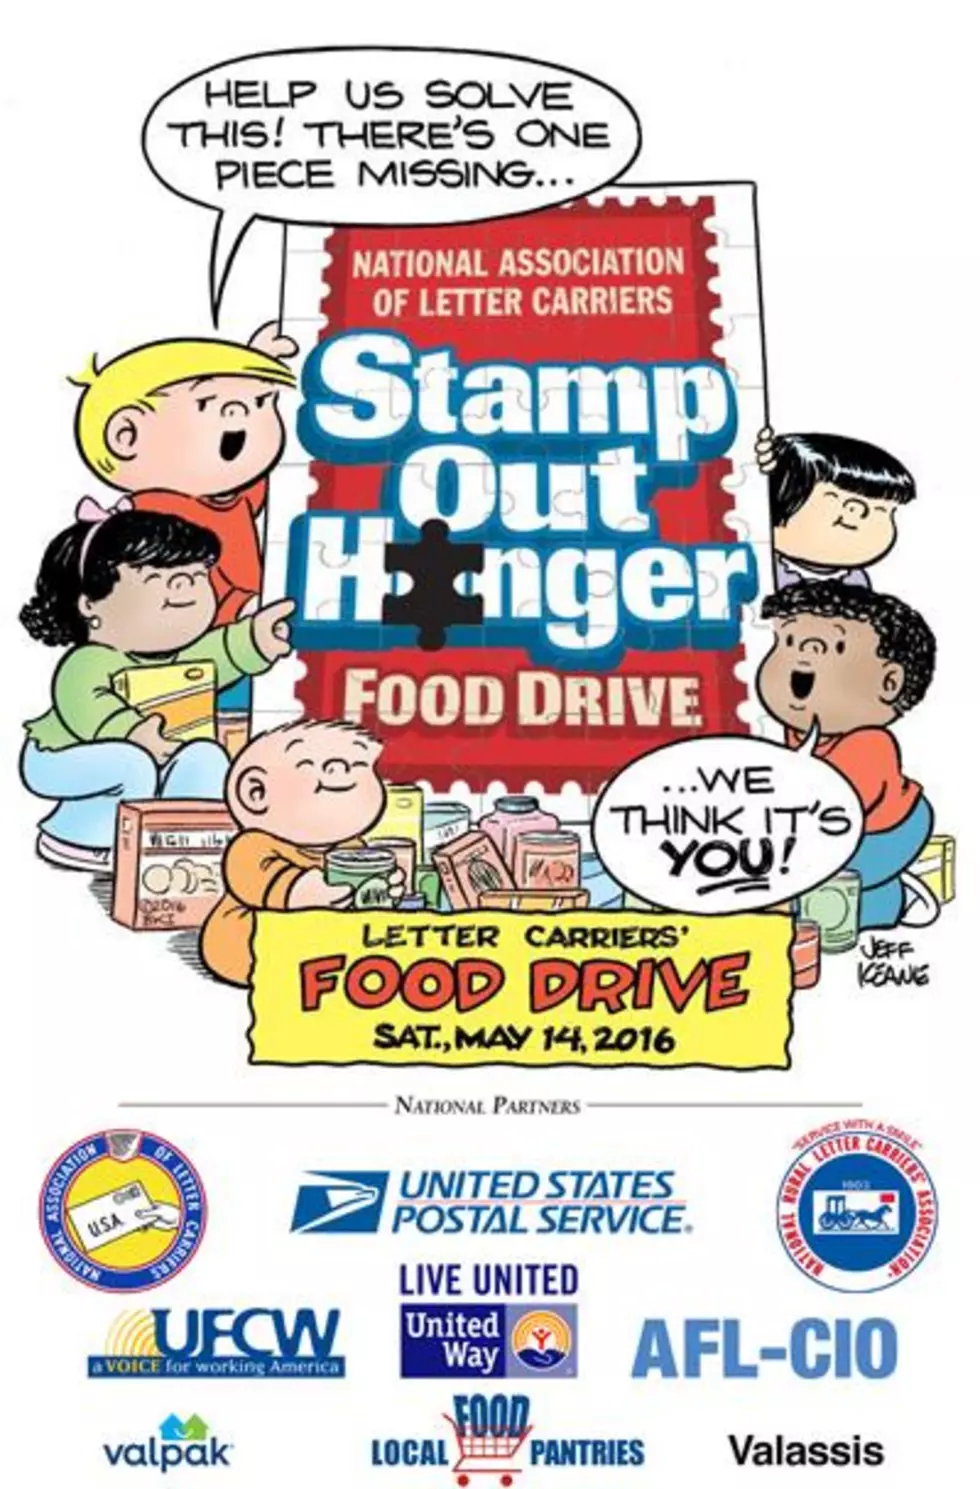 &#8216;Stamp Out Hunger Food Drive&#8217; Is This Saturday, May 14th